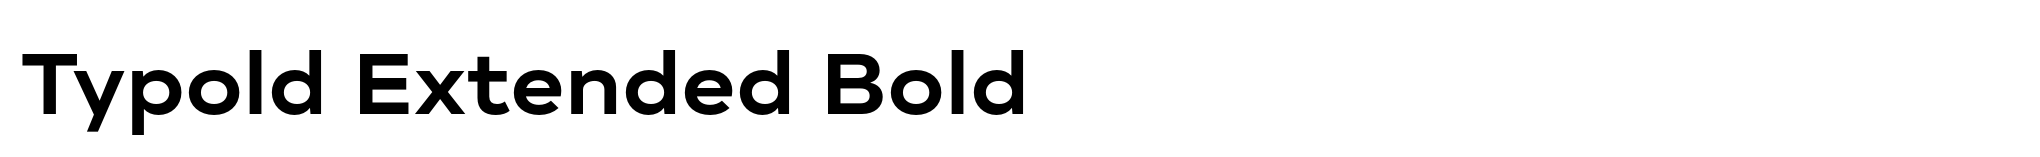 Typold Extended Bold image